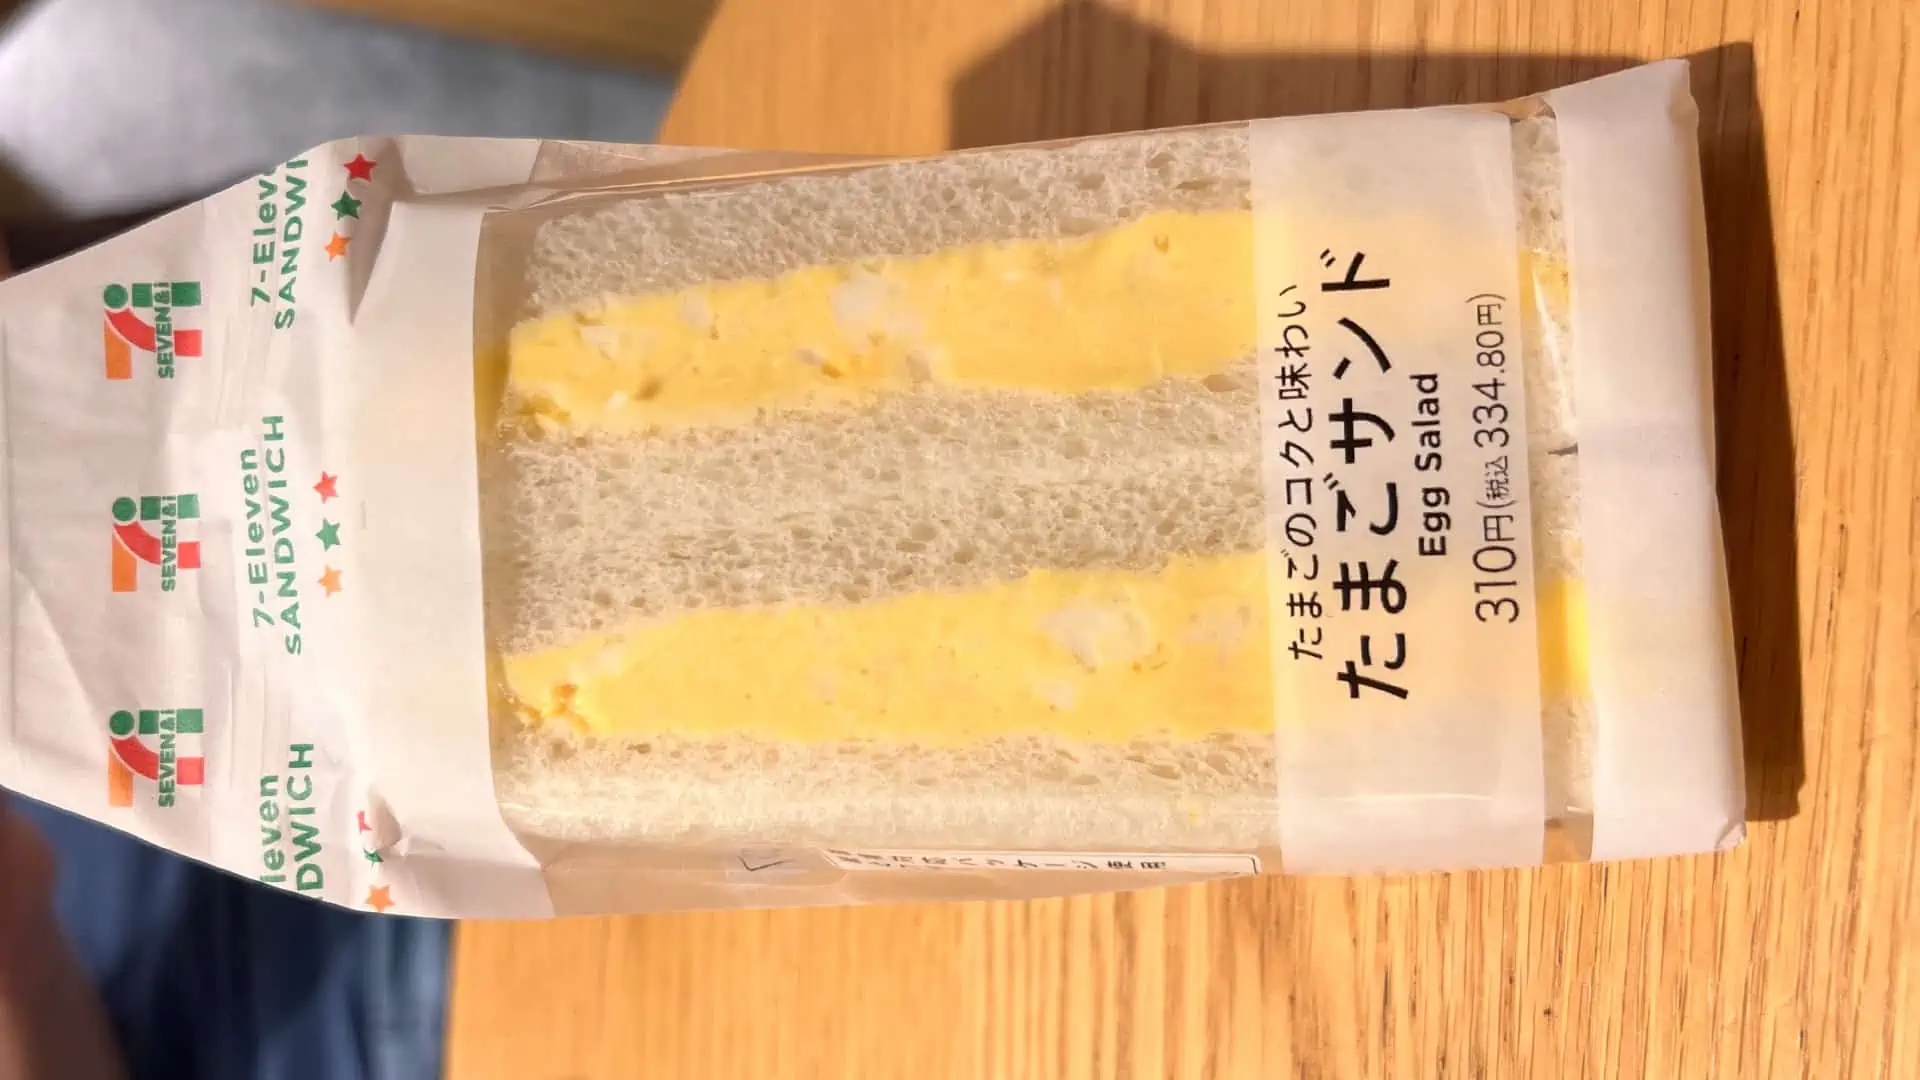 Egg salad sandwich from 7-11